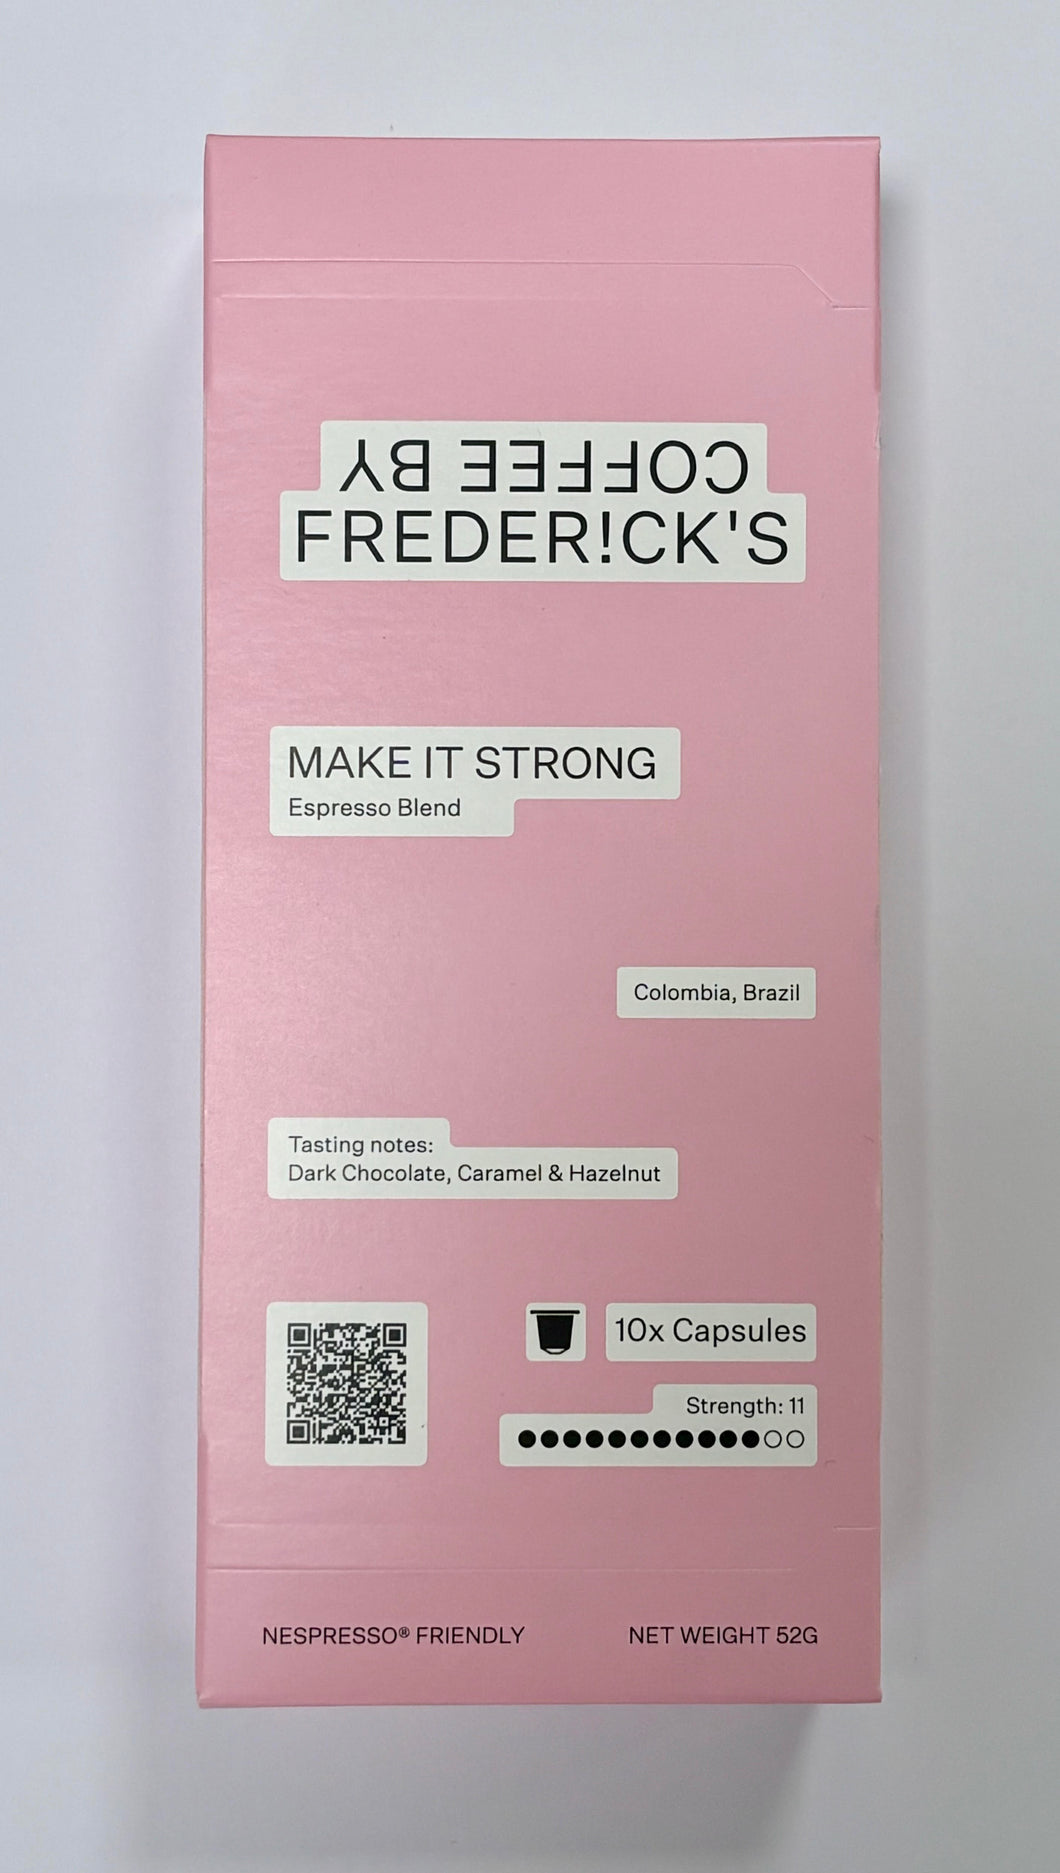 FREDER!CK'S COFFEE PODS - MAKE IT STRONG - 60X PODS